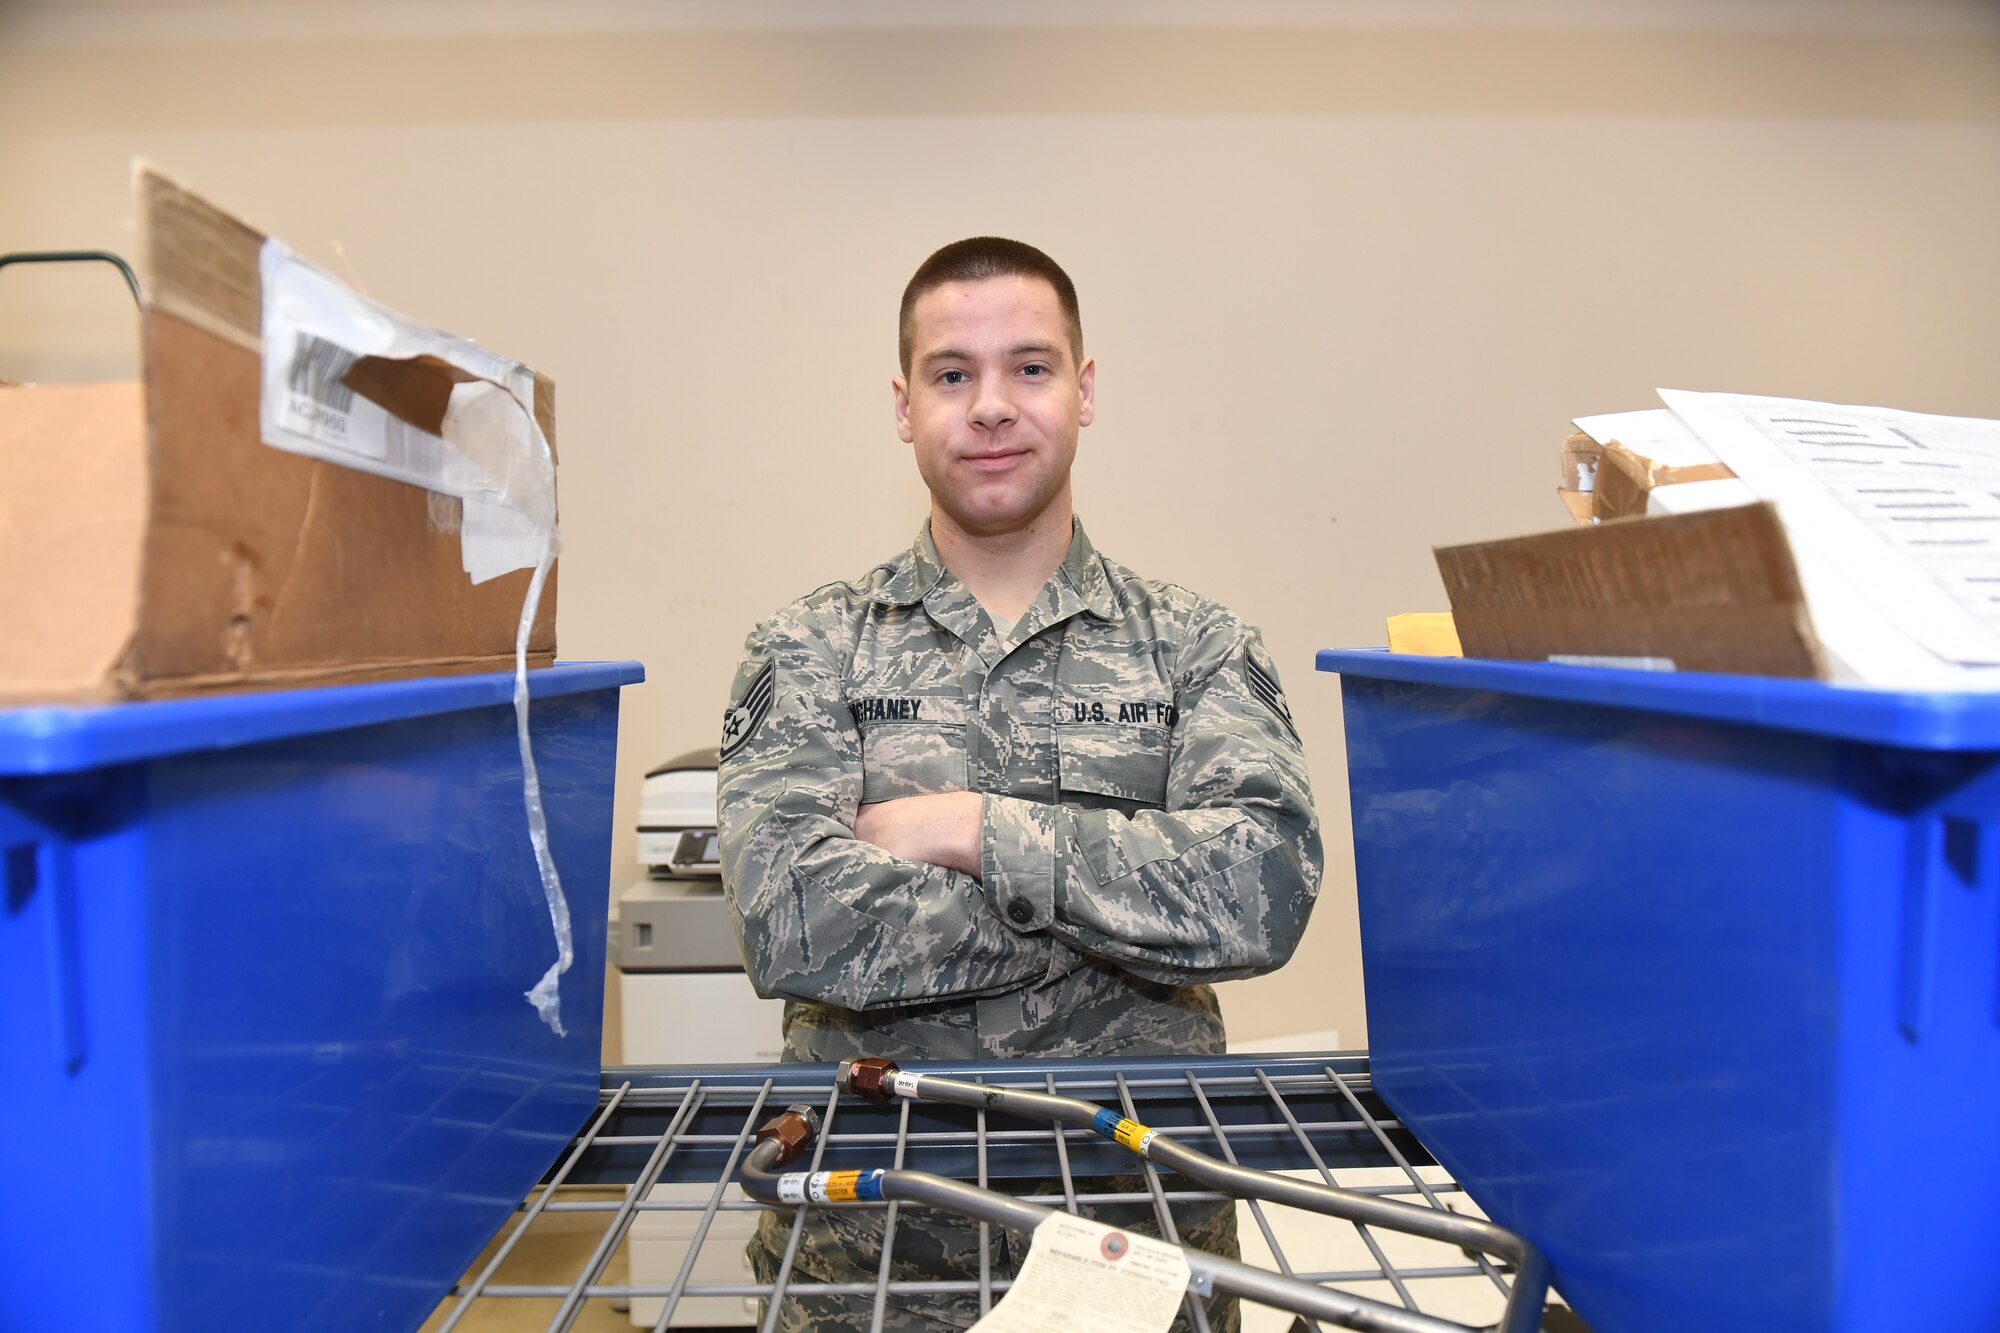 An Airman poses for a photo with his arms crossed